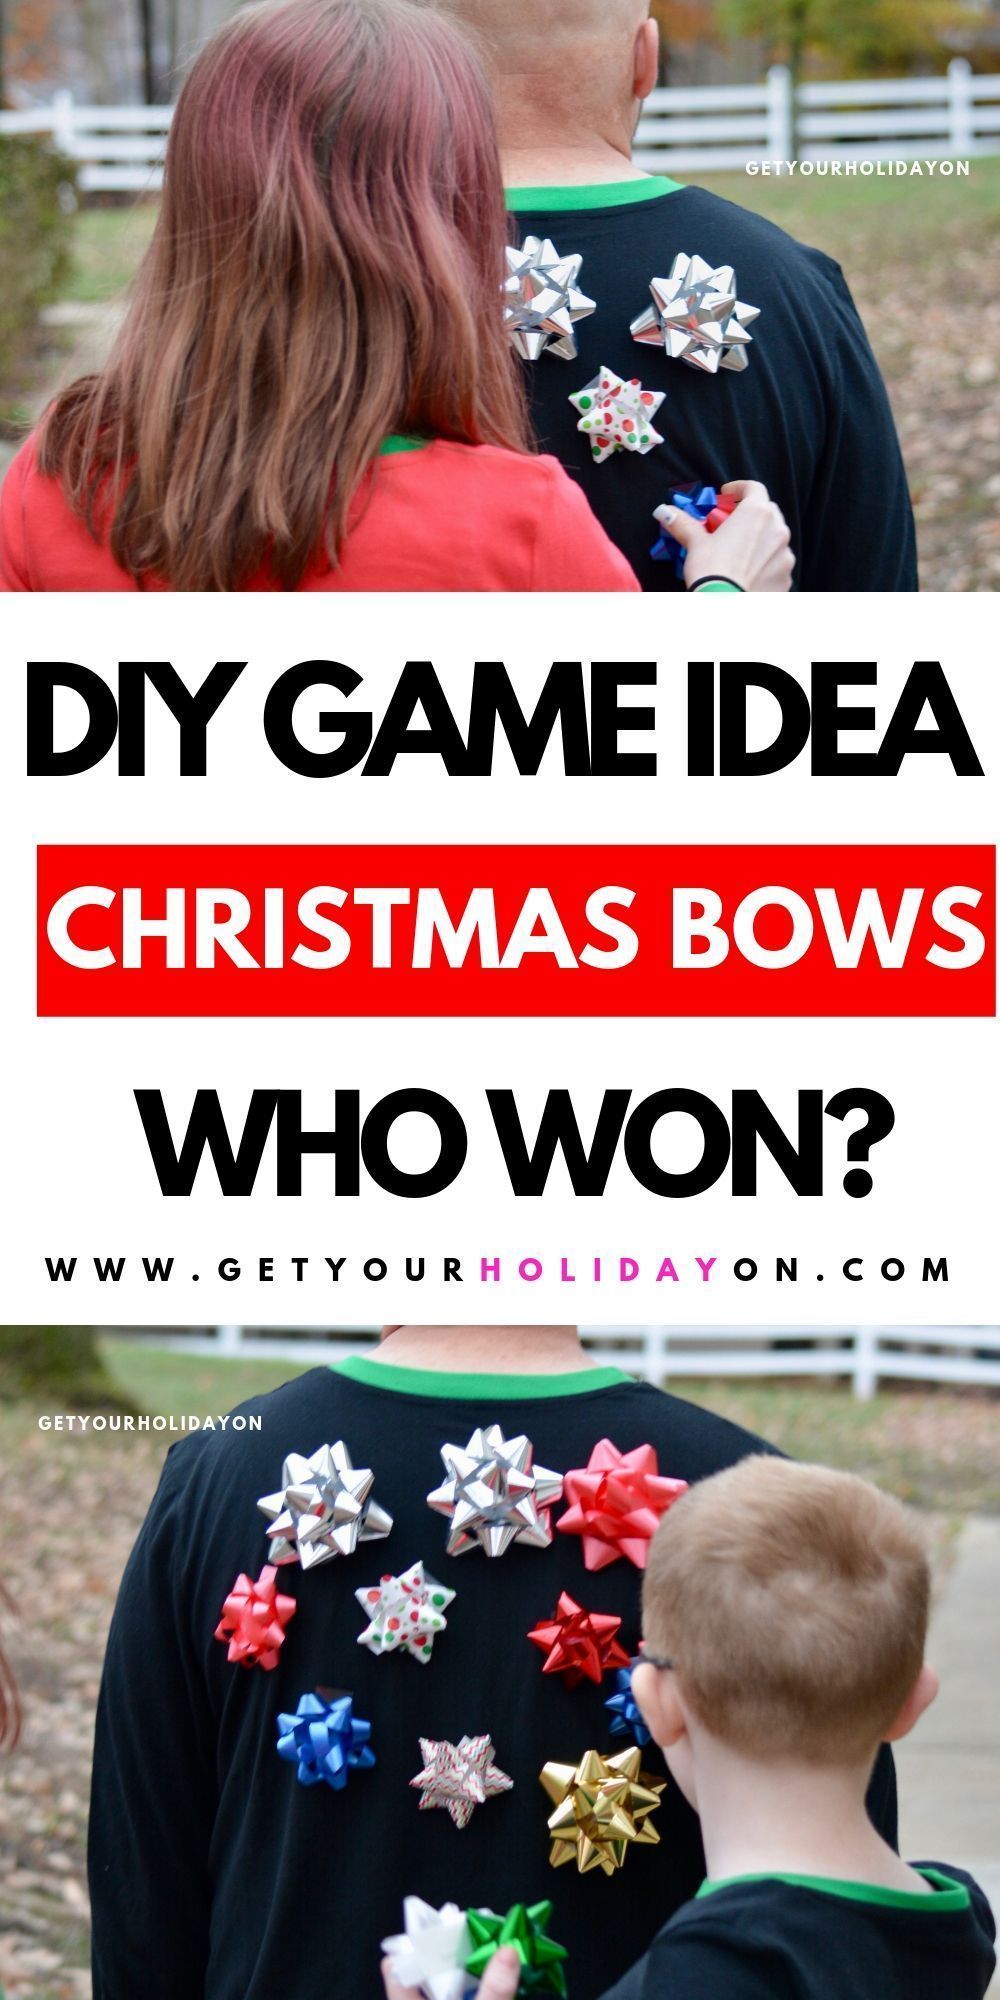 How to Play a Game with Christmas Bows | Get Your Holiday On - How to Play a Game with Christmas Bows | Get Your Holiday On -   17 diy Christmas games ideas